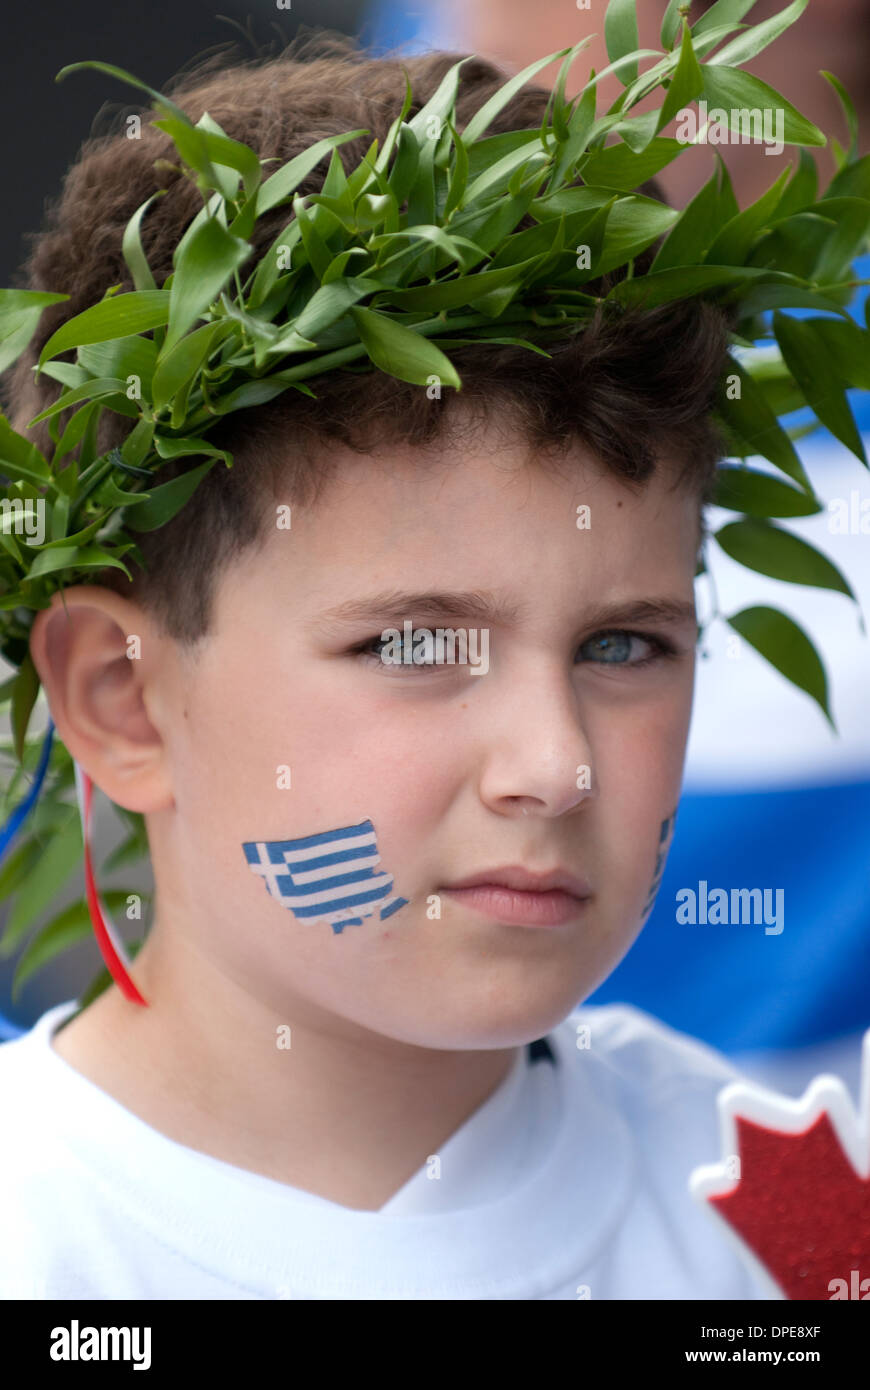 Young boy wearing a laurel wreath on his head and a painted flag of Greece  on his cheek Stock Photo - Alamy